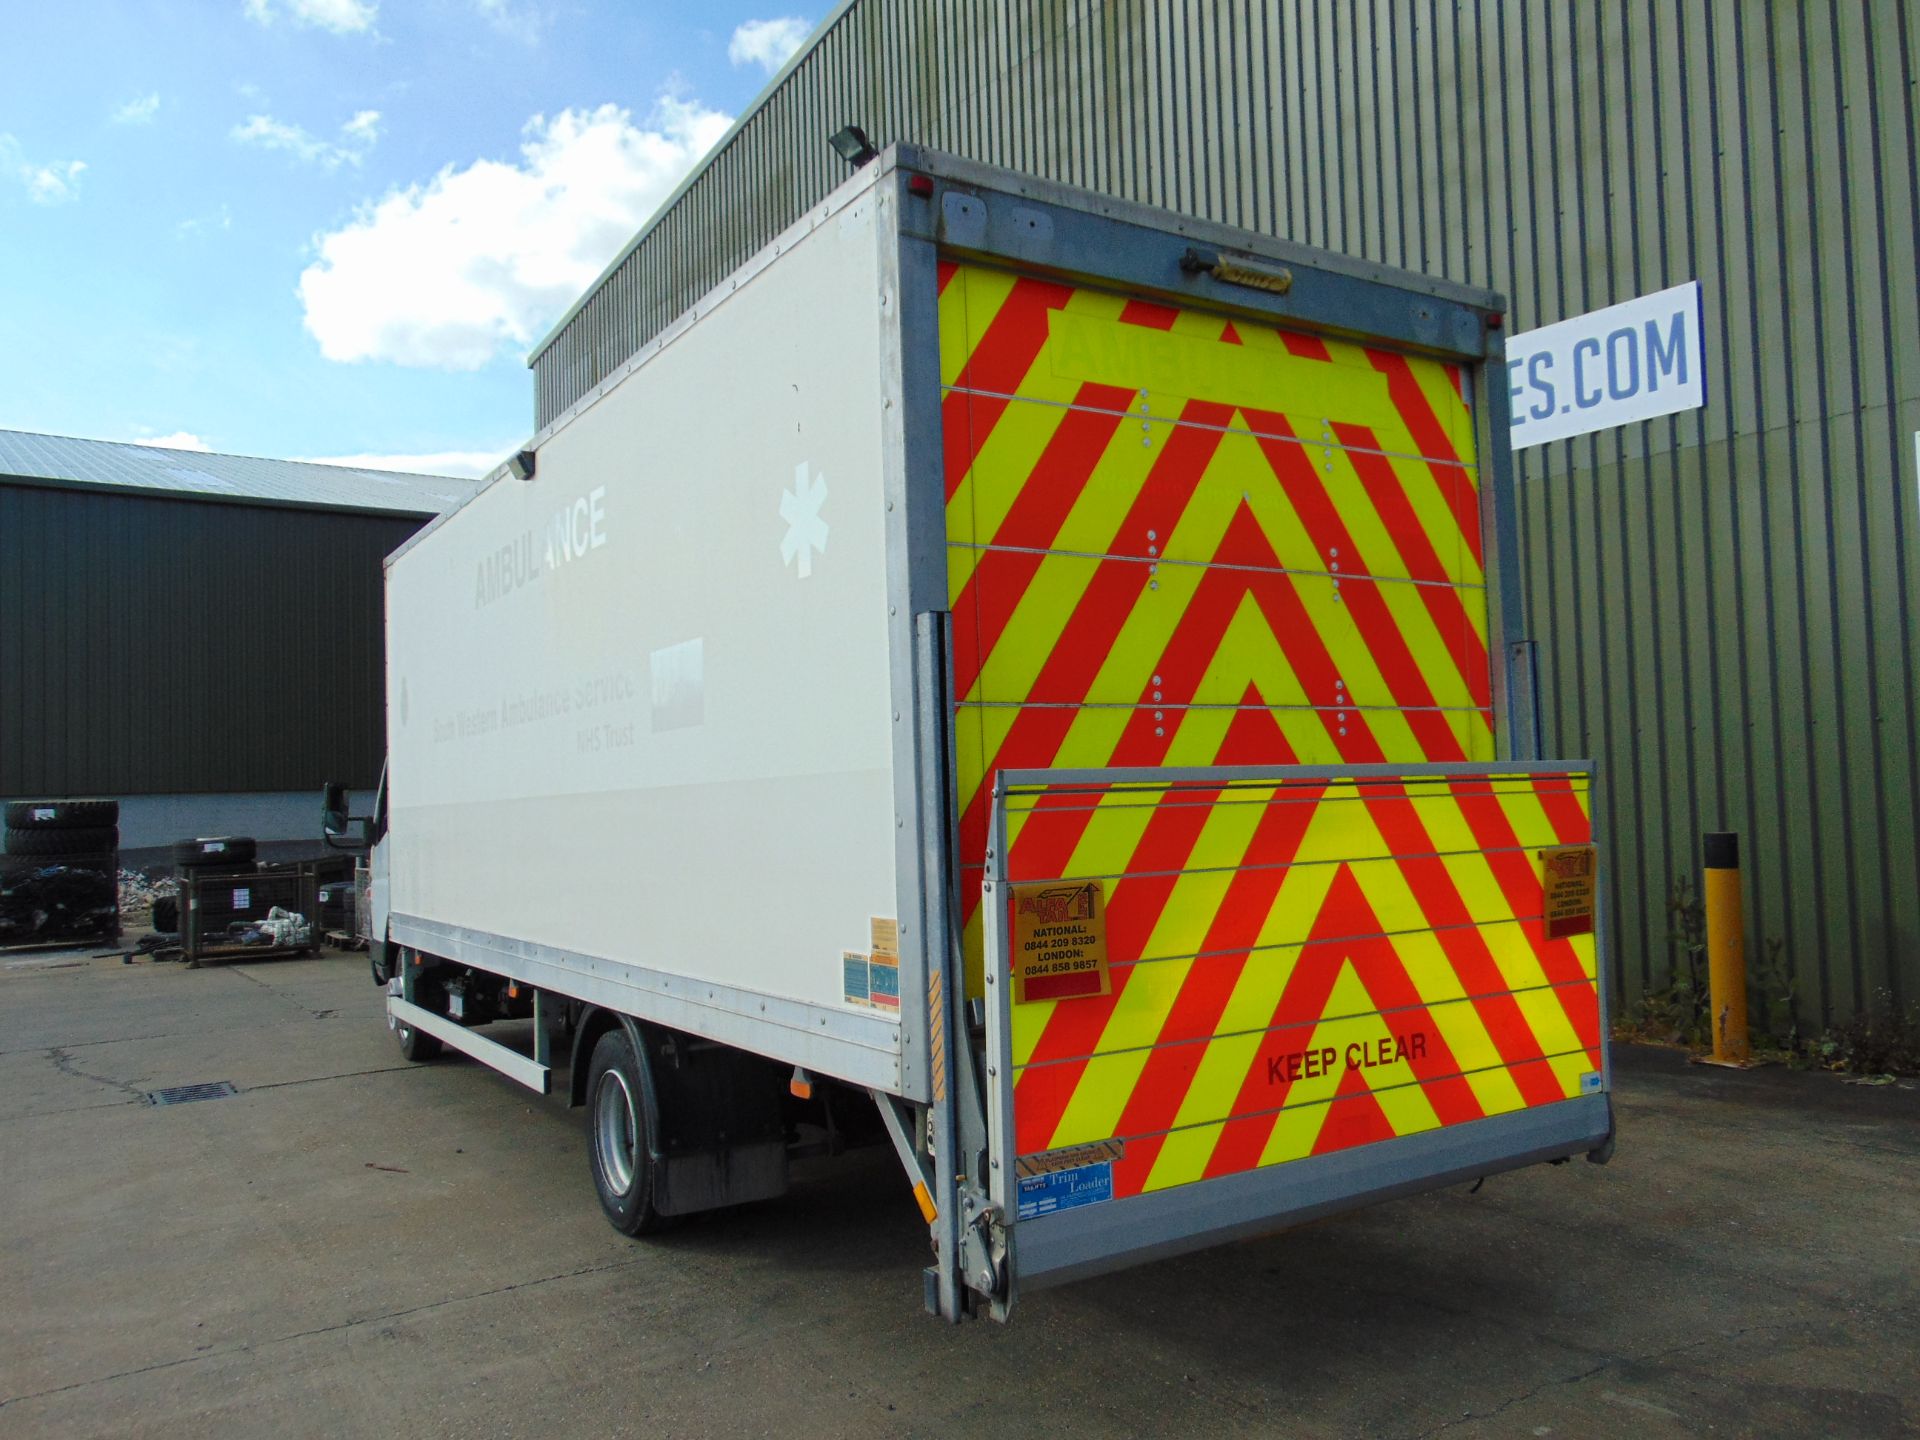 2011 Mitsubishi Fuso Canter Box lorry 7.5T - Only 5400 Miles! - Image 8 of 51